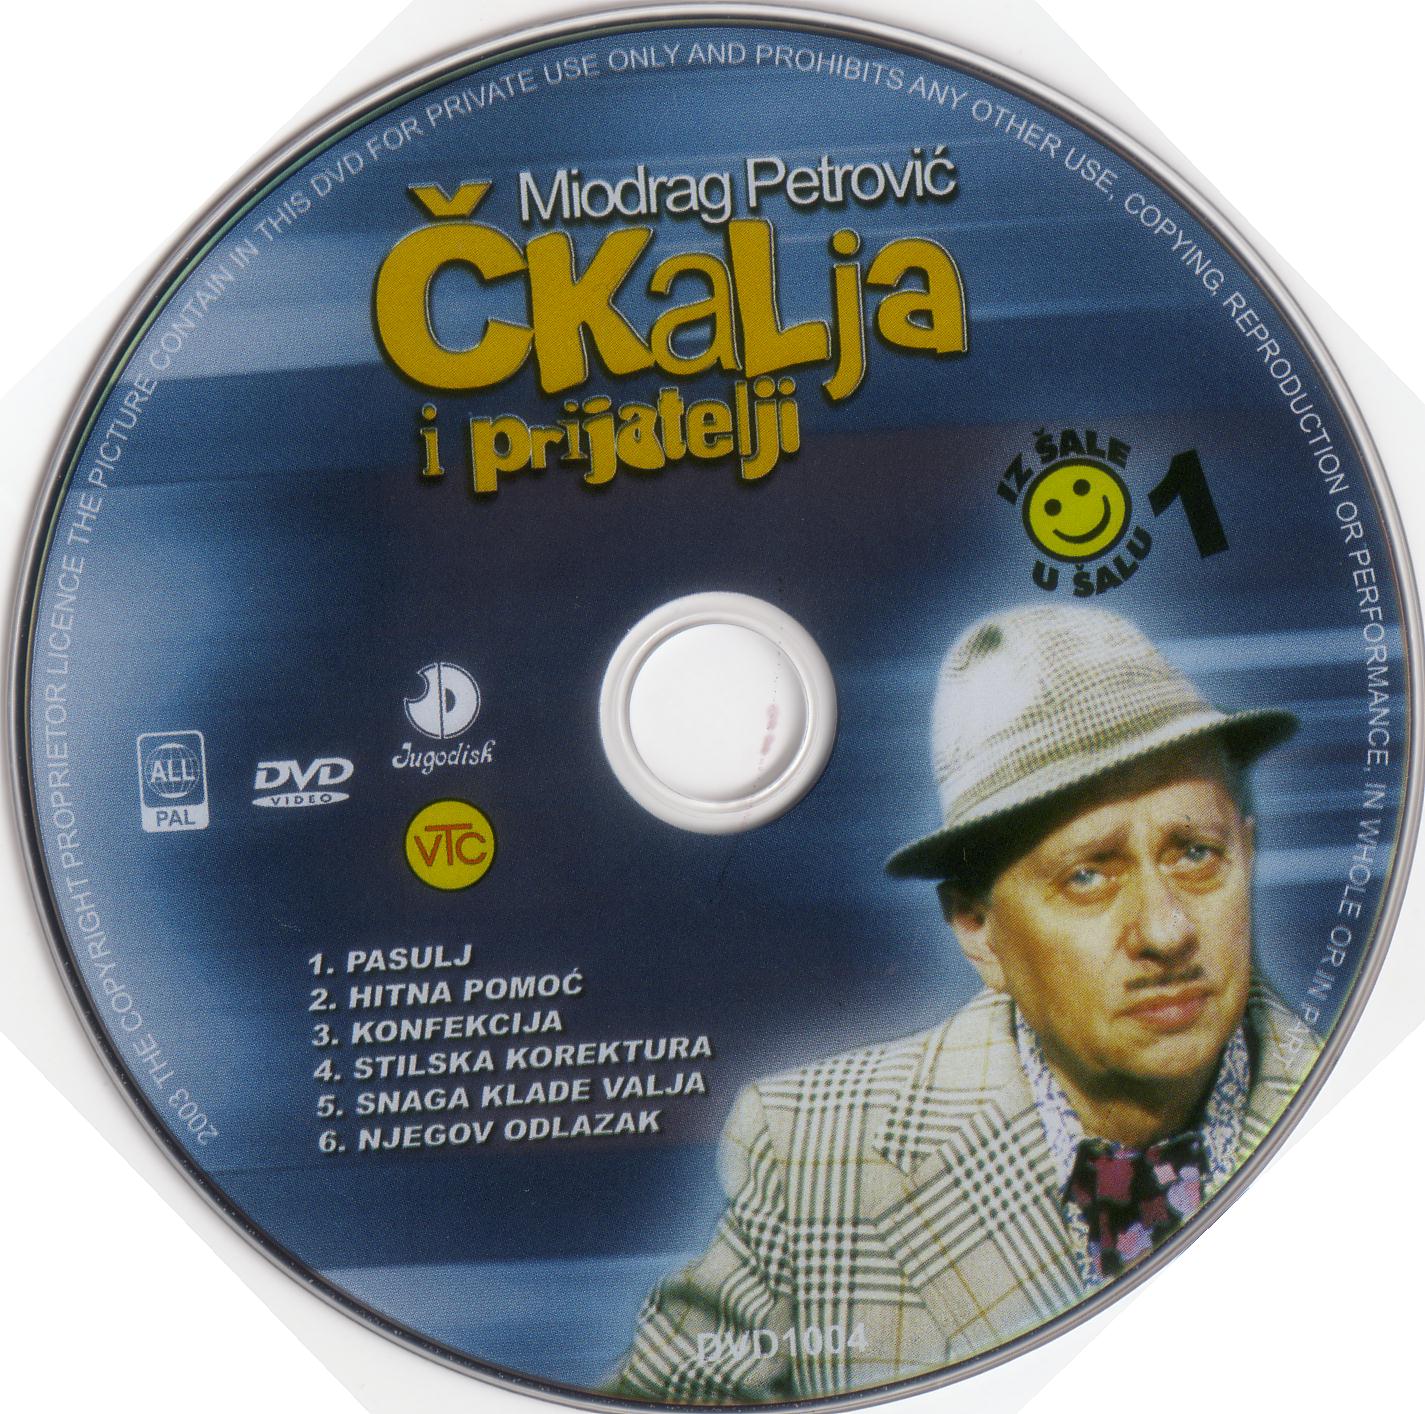 Click to view full size image -  DVD Cover - C - DVD - CKALJA I PRIJATELJI - CD - DVD - CKALJA I PRIJATELJI - CD.JPG